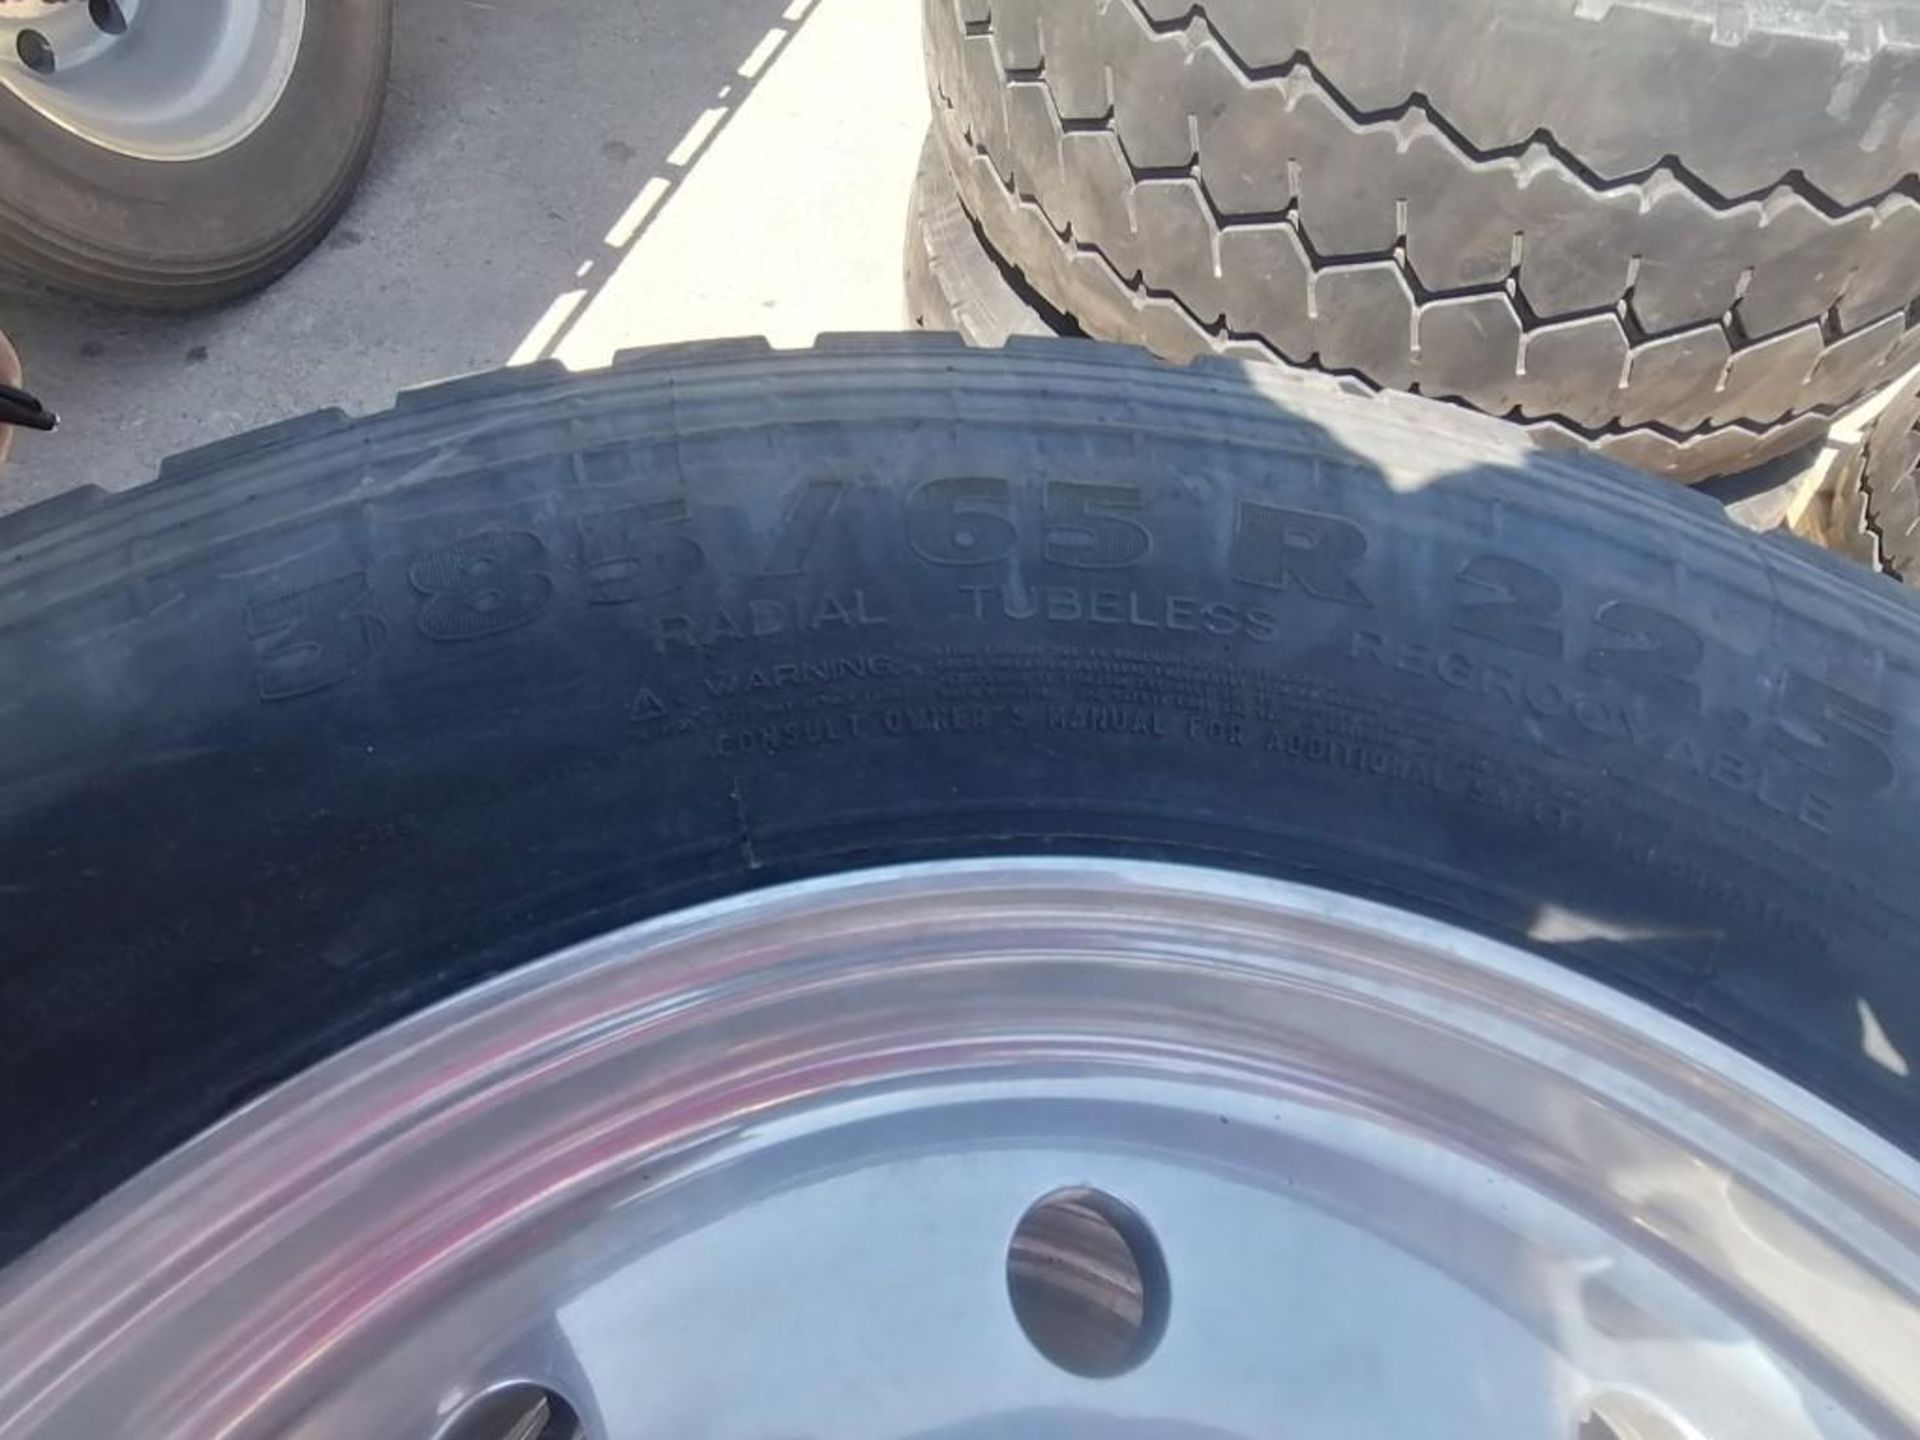 (2) Michelin 385/65R 22.5 Steer Tires with Rims. Located at 301 E Henry Street, Mt. Pleasant, IA - Image 4 of 4